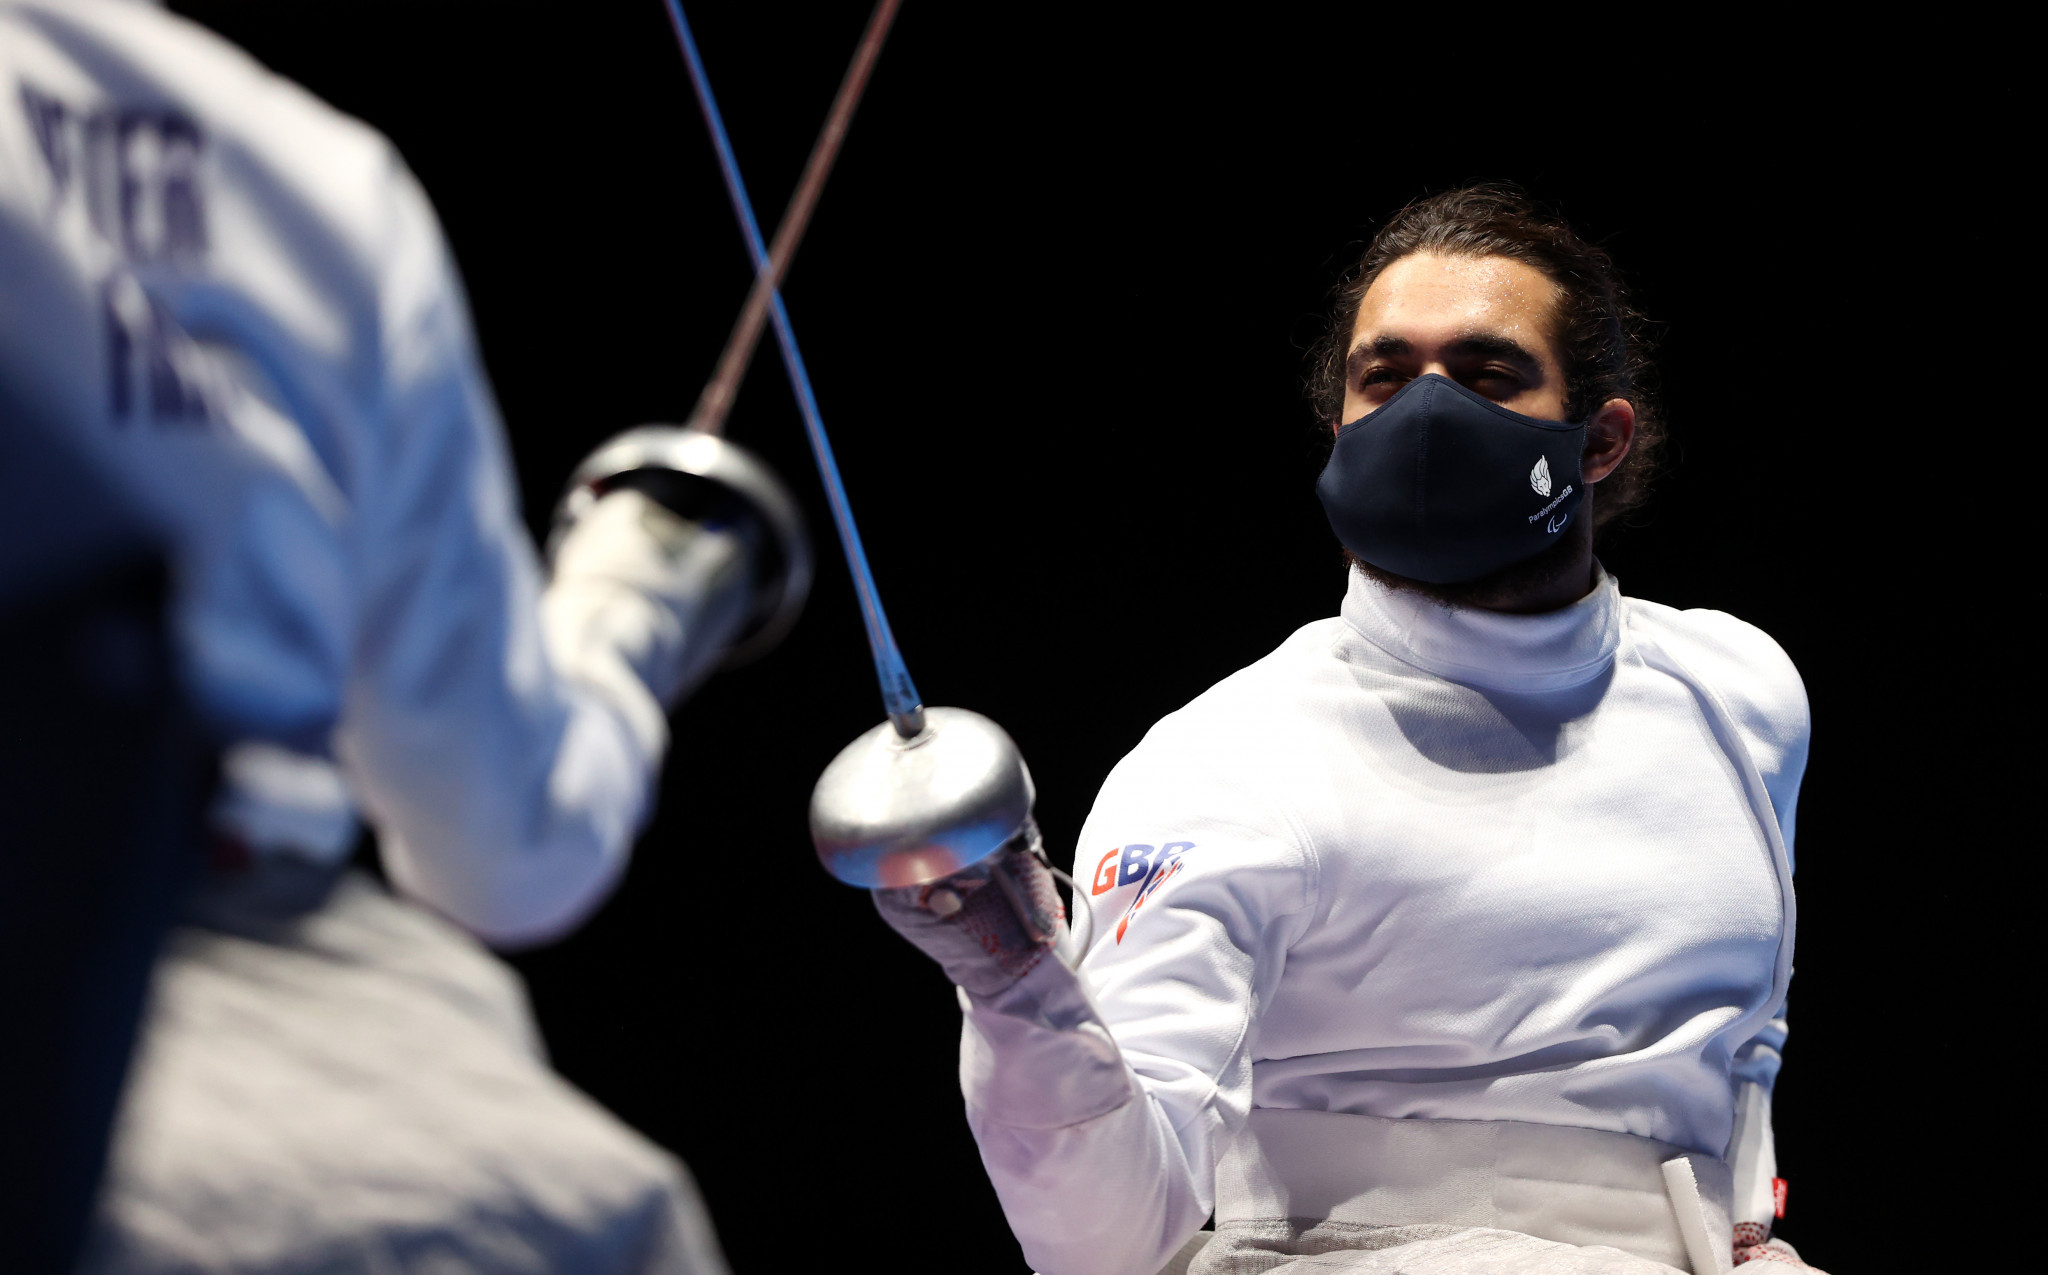 Dimitri Coutya defeated Marc Andre Cratere in the final of the men's épée category B ©Getty Images